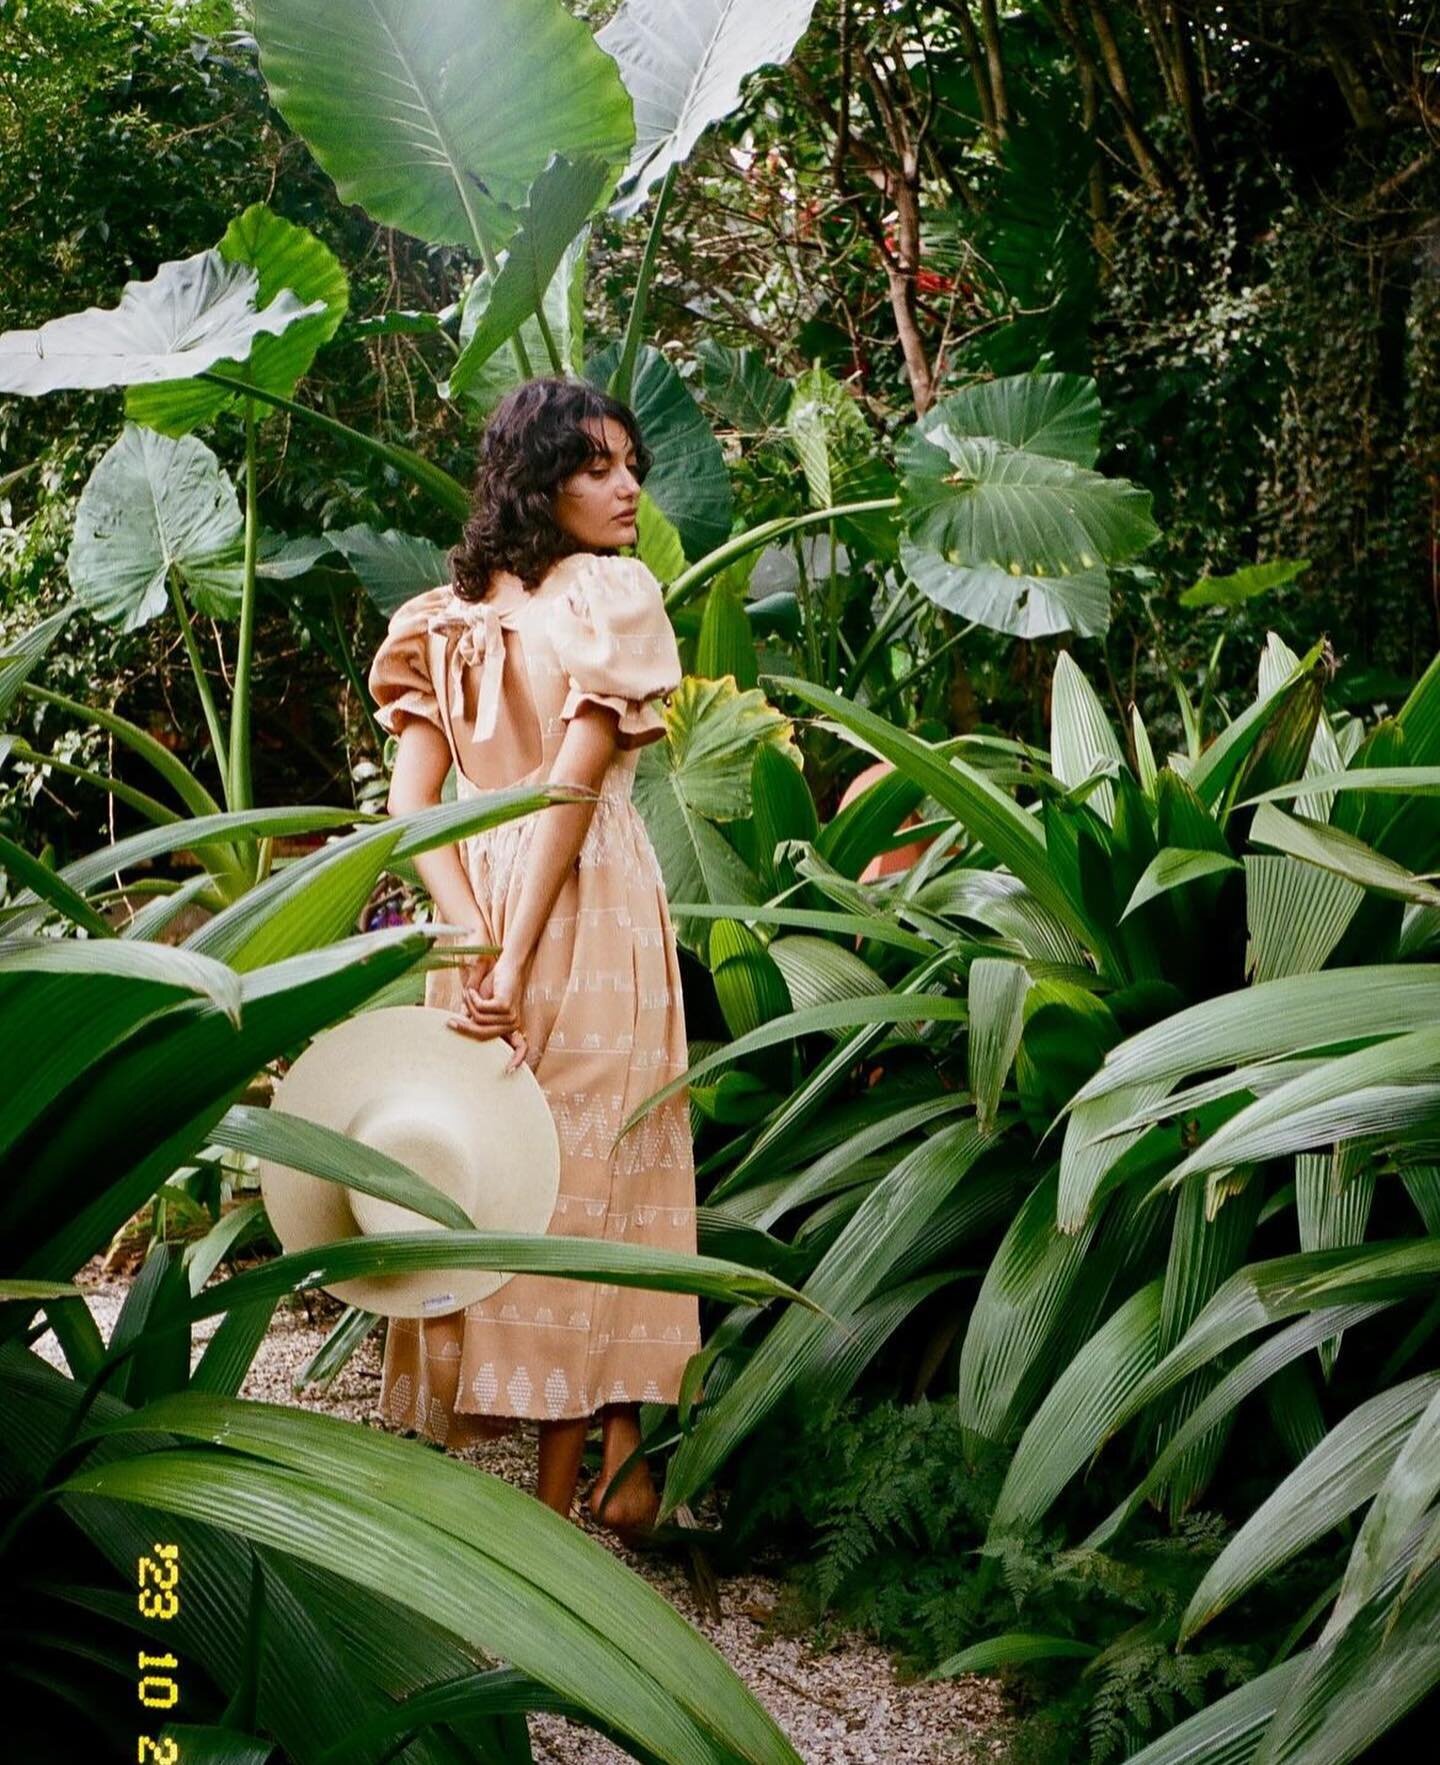 Love these film shots from our photoshoot on the Guatemala trip last month by @patiencecadence ! A beautiful collaboration of women: Our model @arlynmlorenzana in @casa.de.stela at the gorgeous @lunazorro_studio created by @luna_zorro 🌱🌱 Our next G